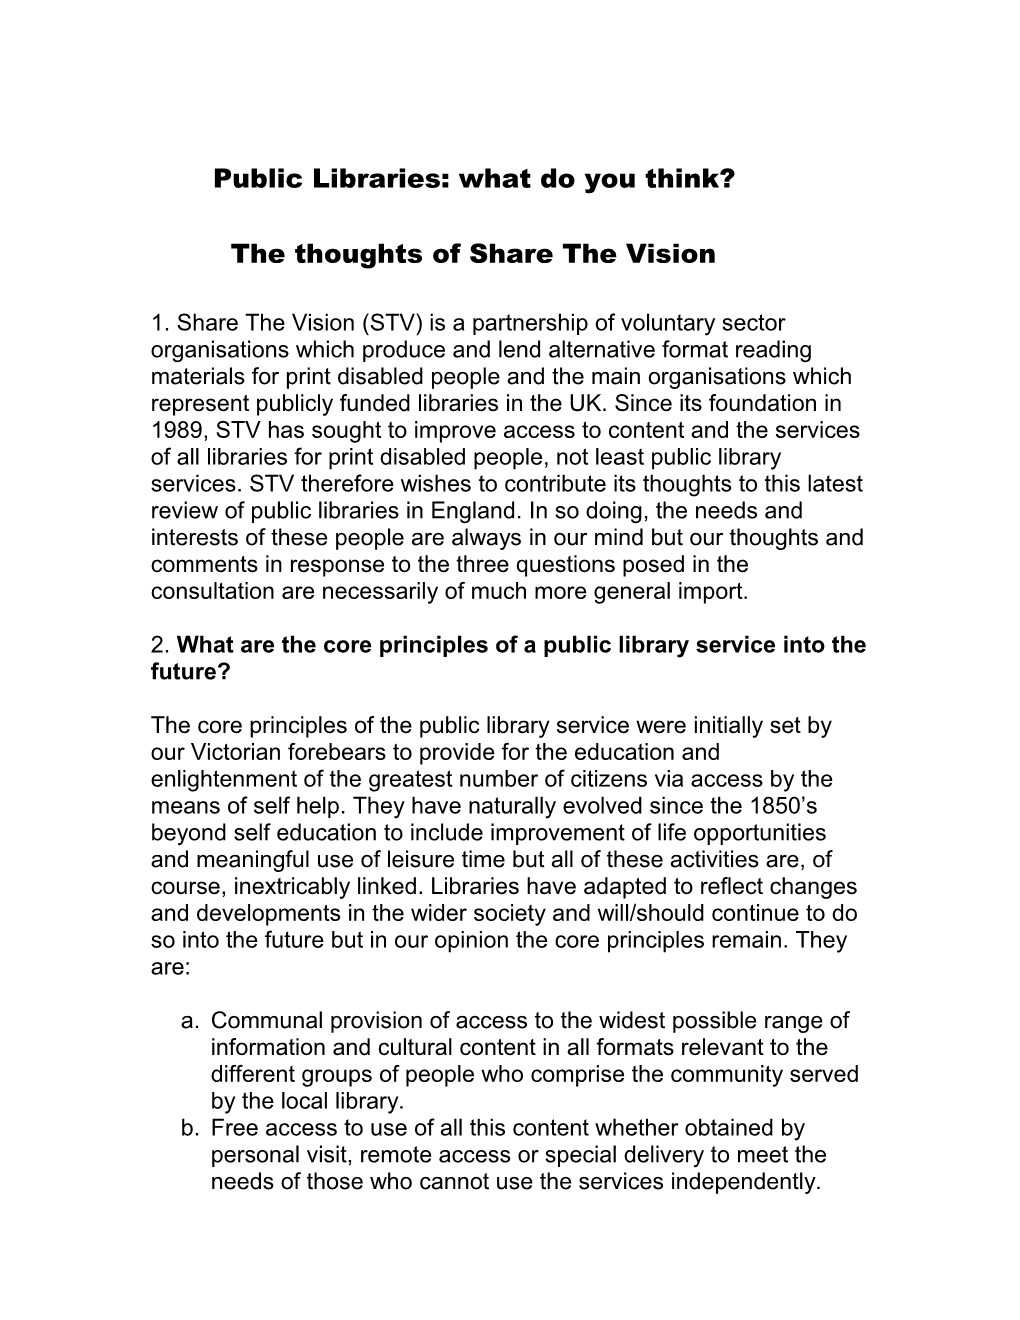 Public Libraries: What Do You Think?